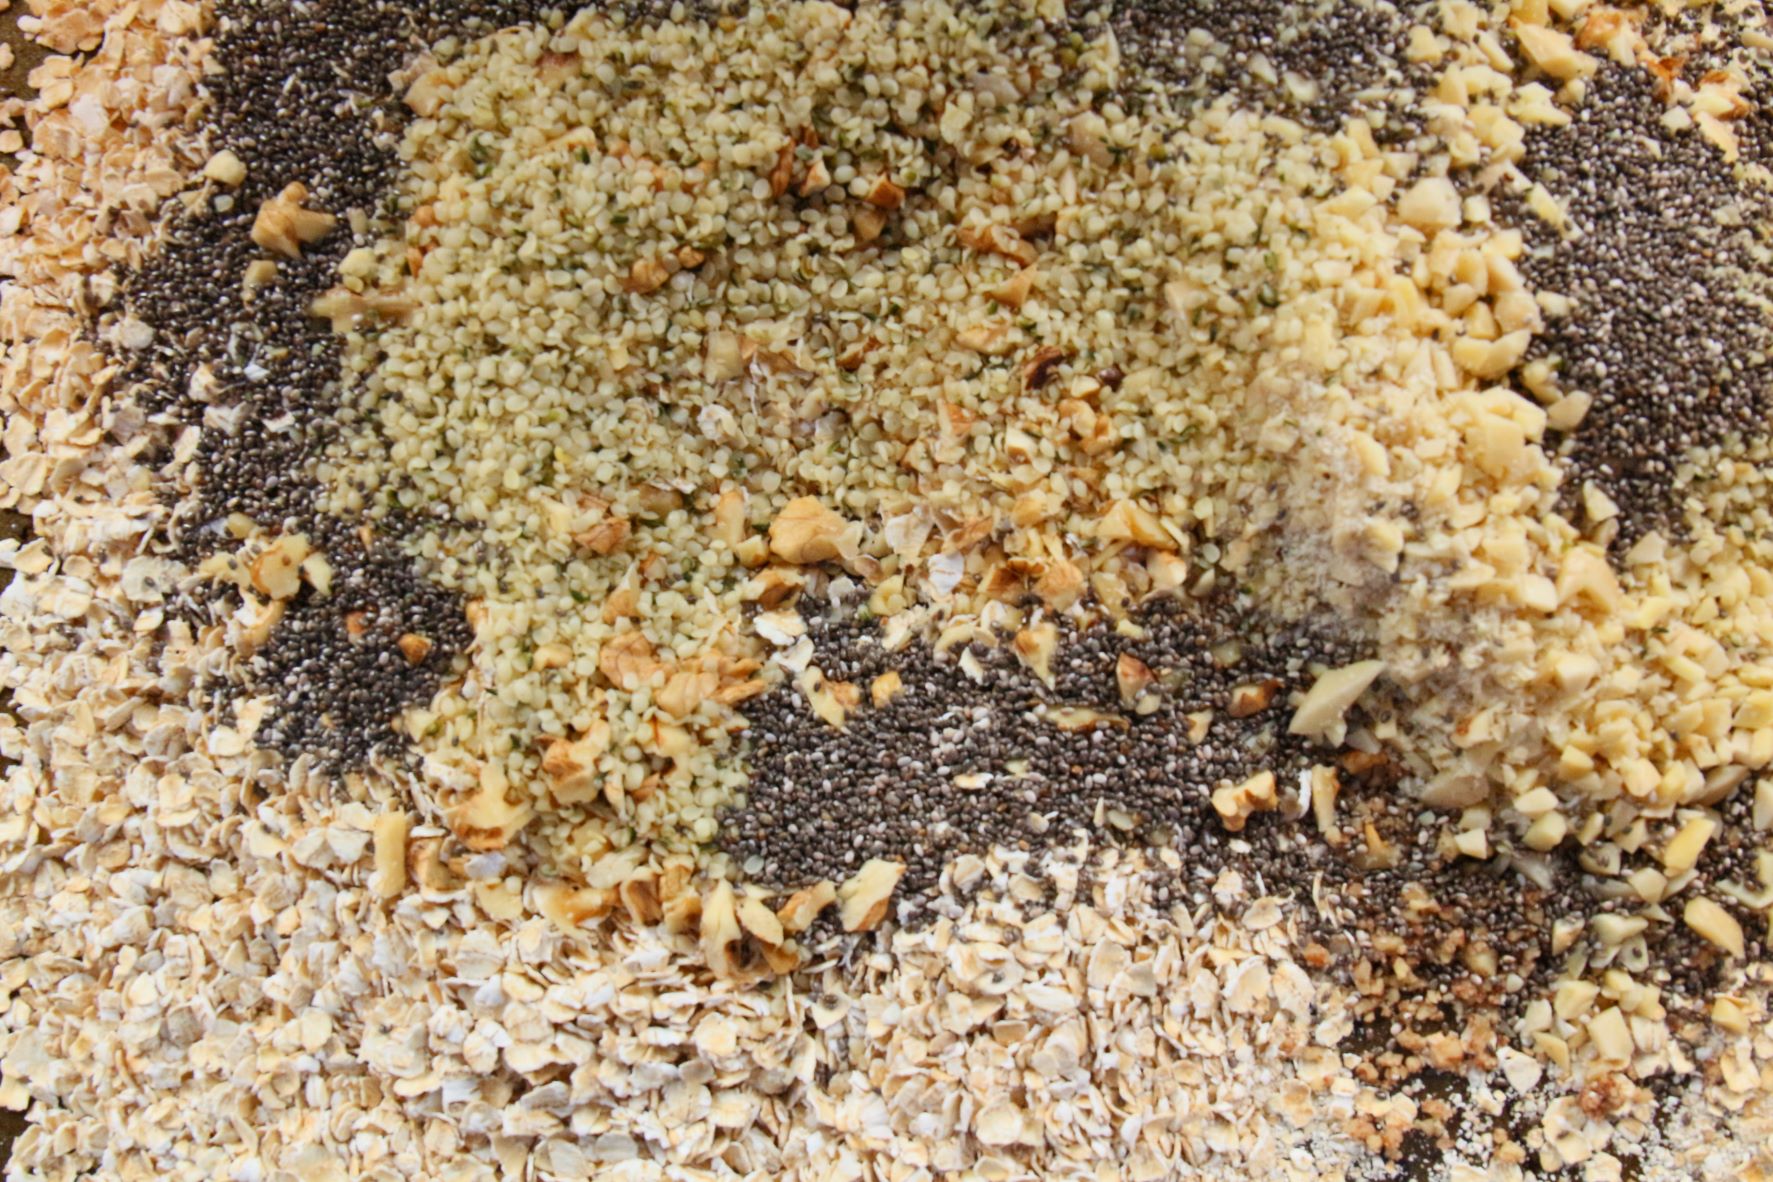 Sheet pan of toasted nuts and oats for granola bars